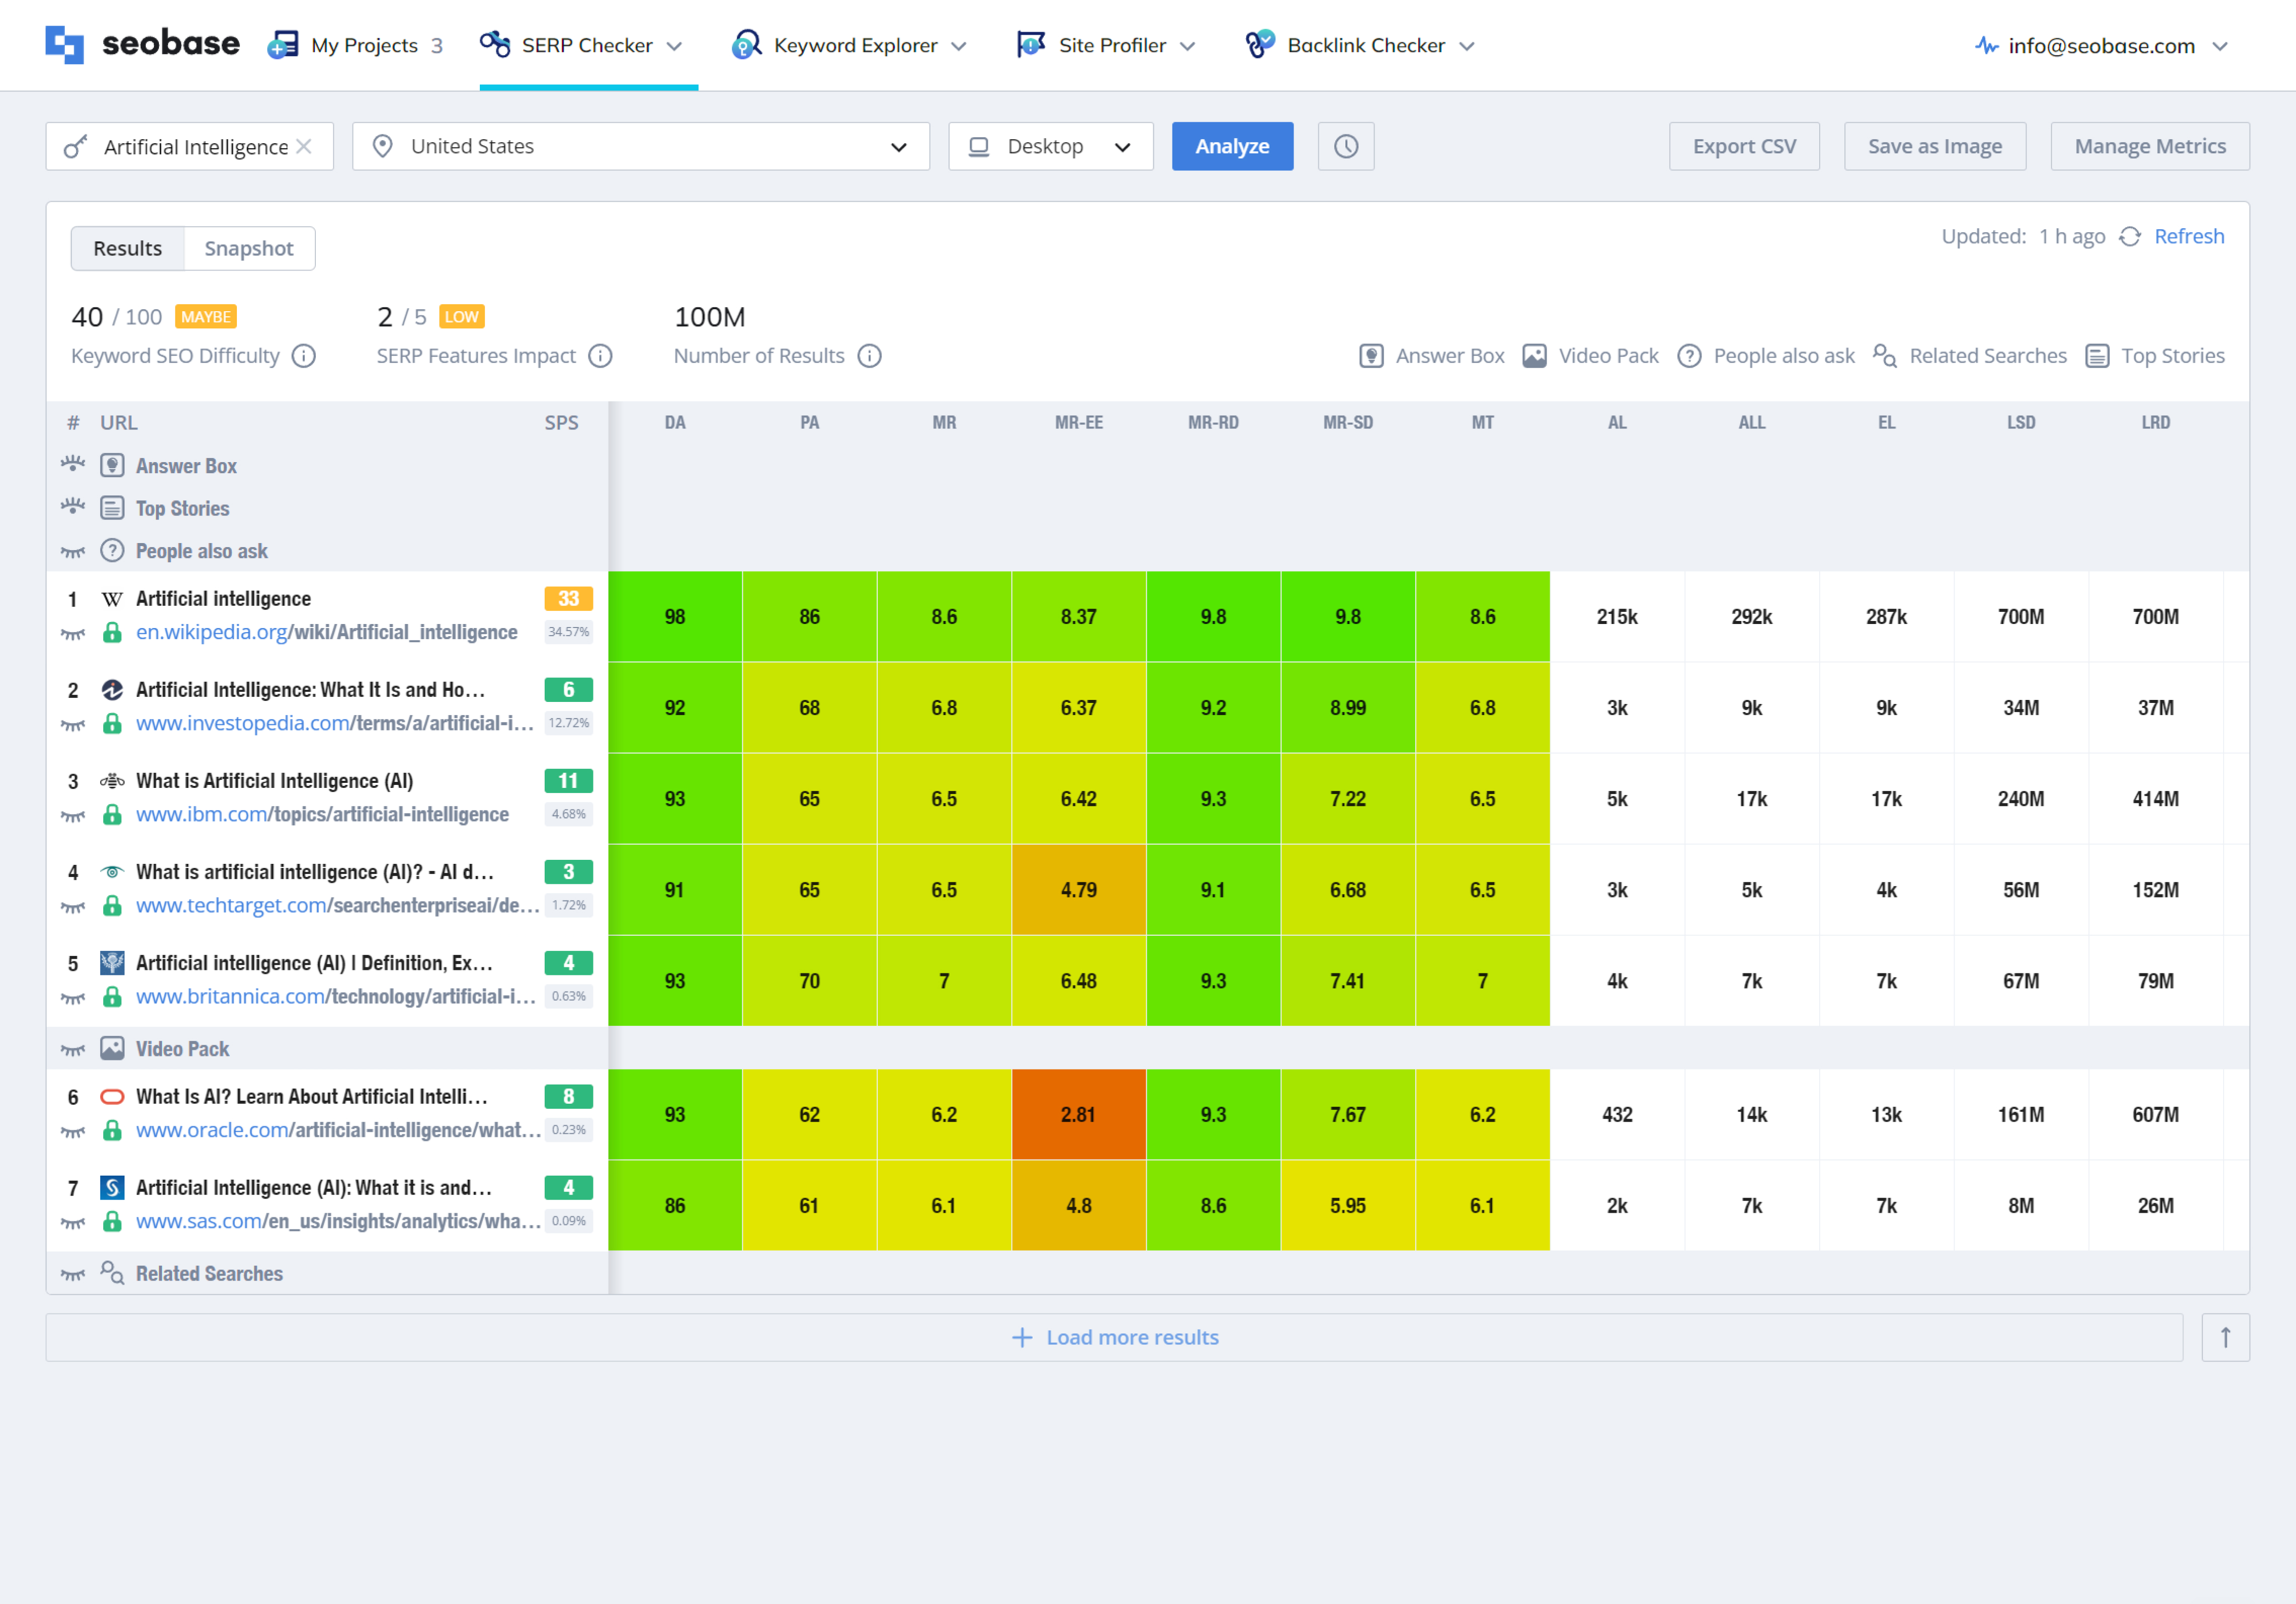 SERP Checker - Analyze and compare the strengths and weaknesses of your website